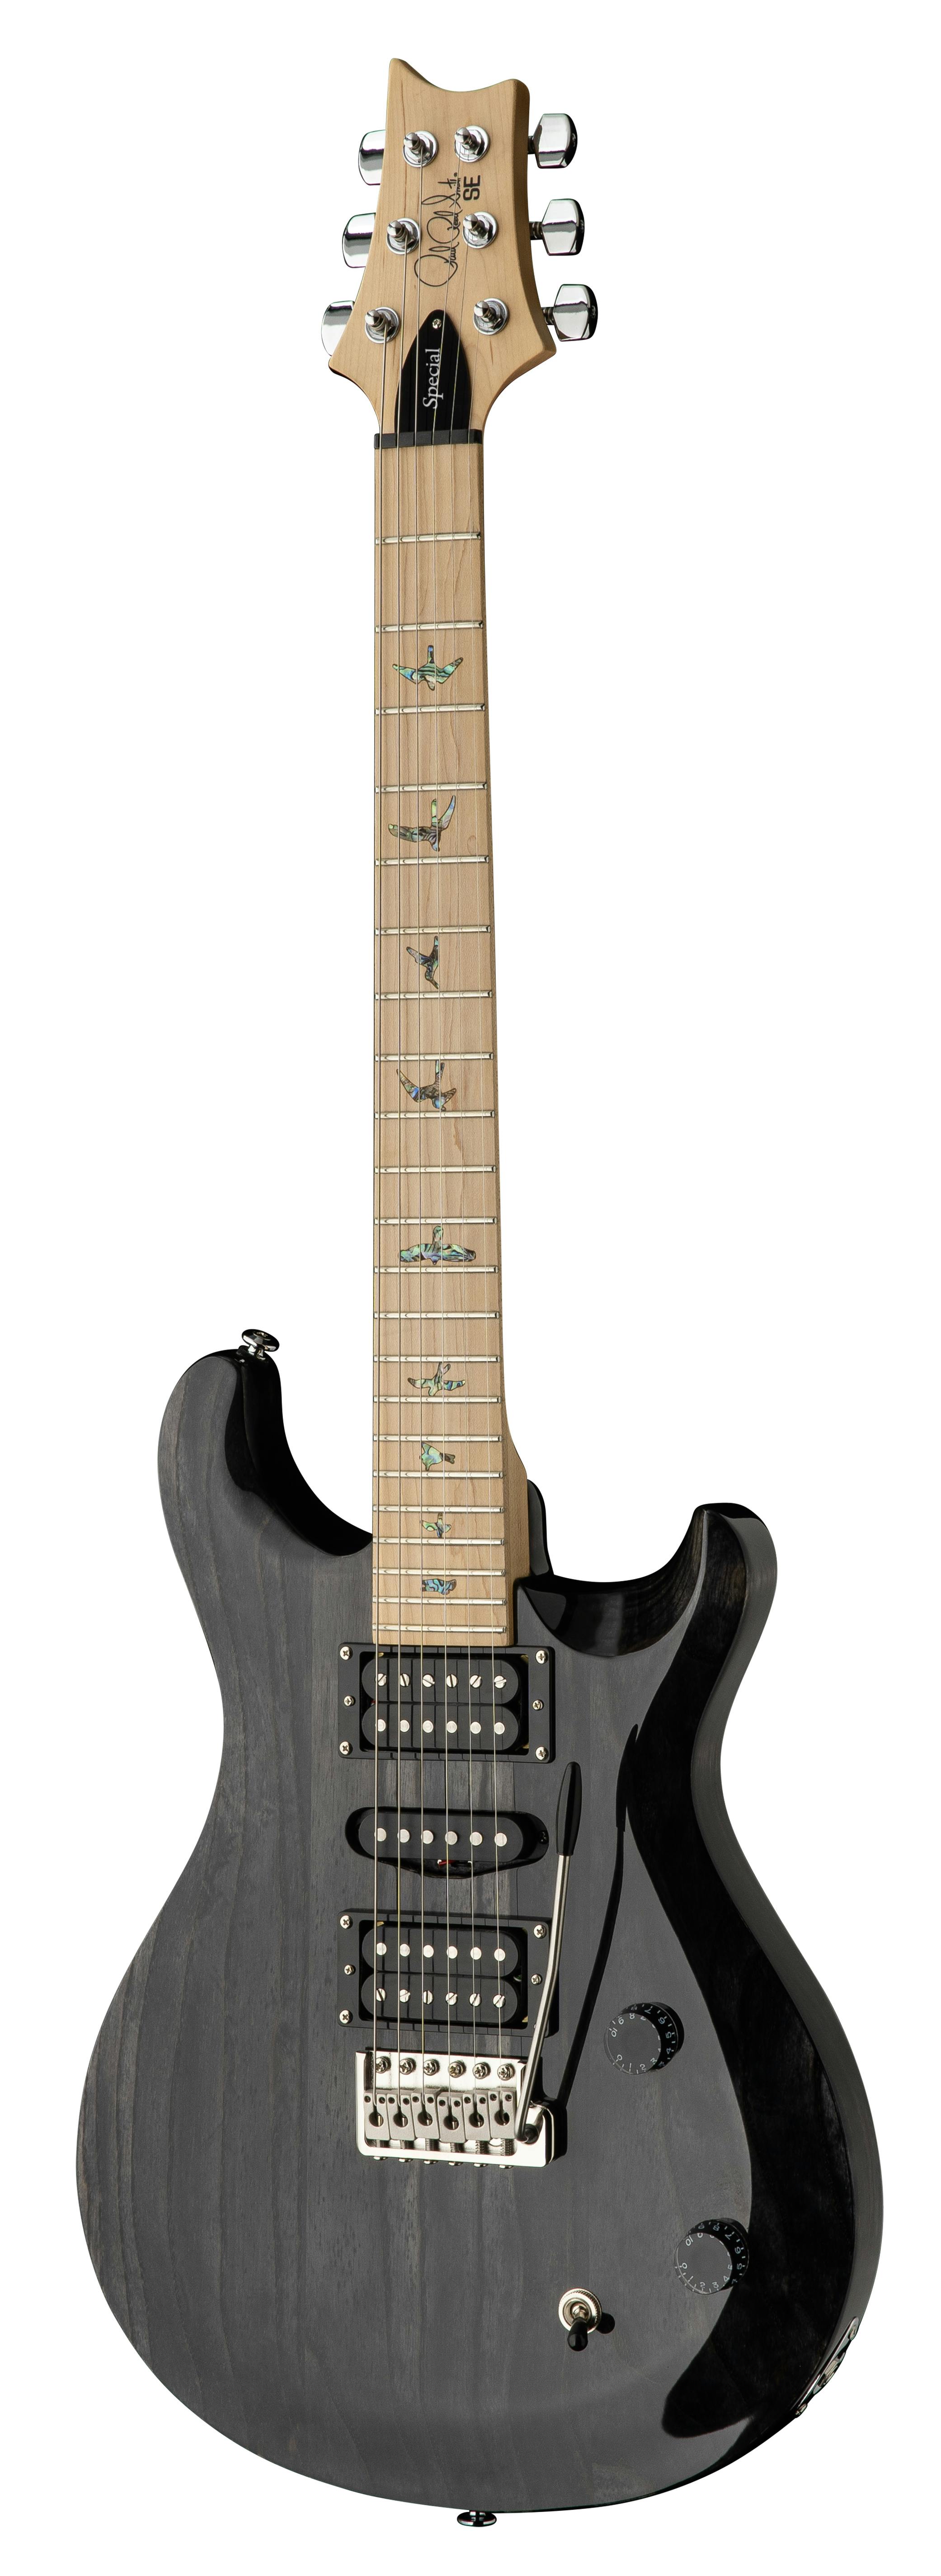 PRS SE Swamp Ash Special Electric Guitar in Charcoal - Andertons Music Co.